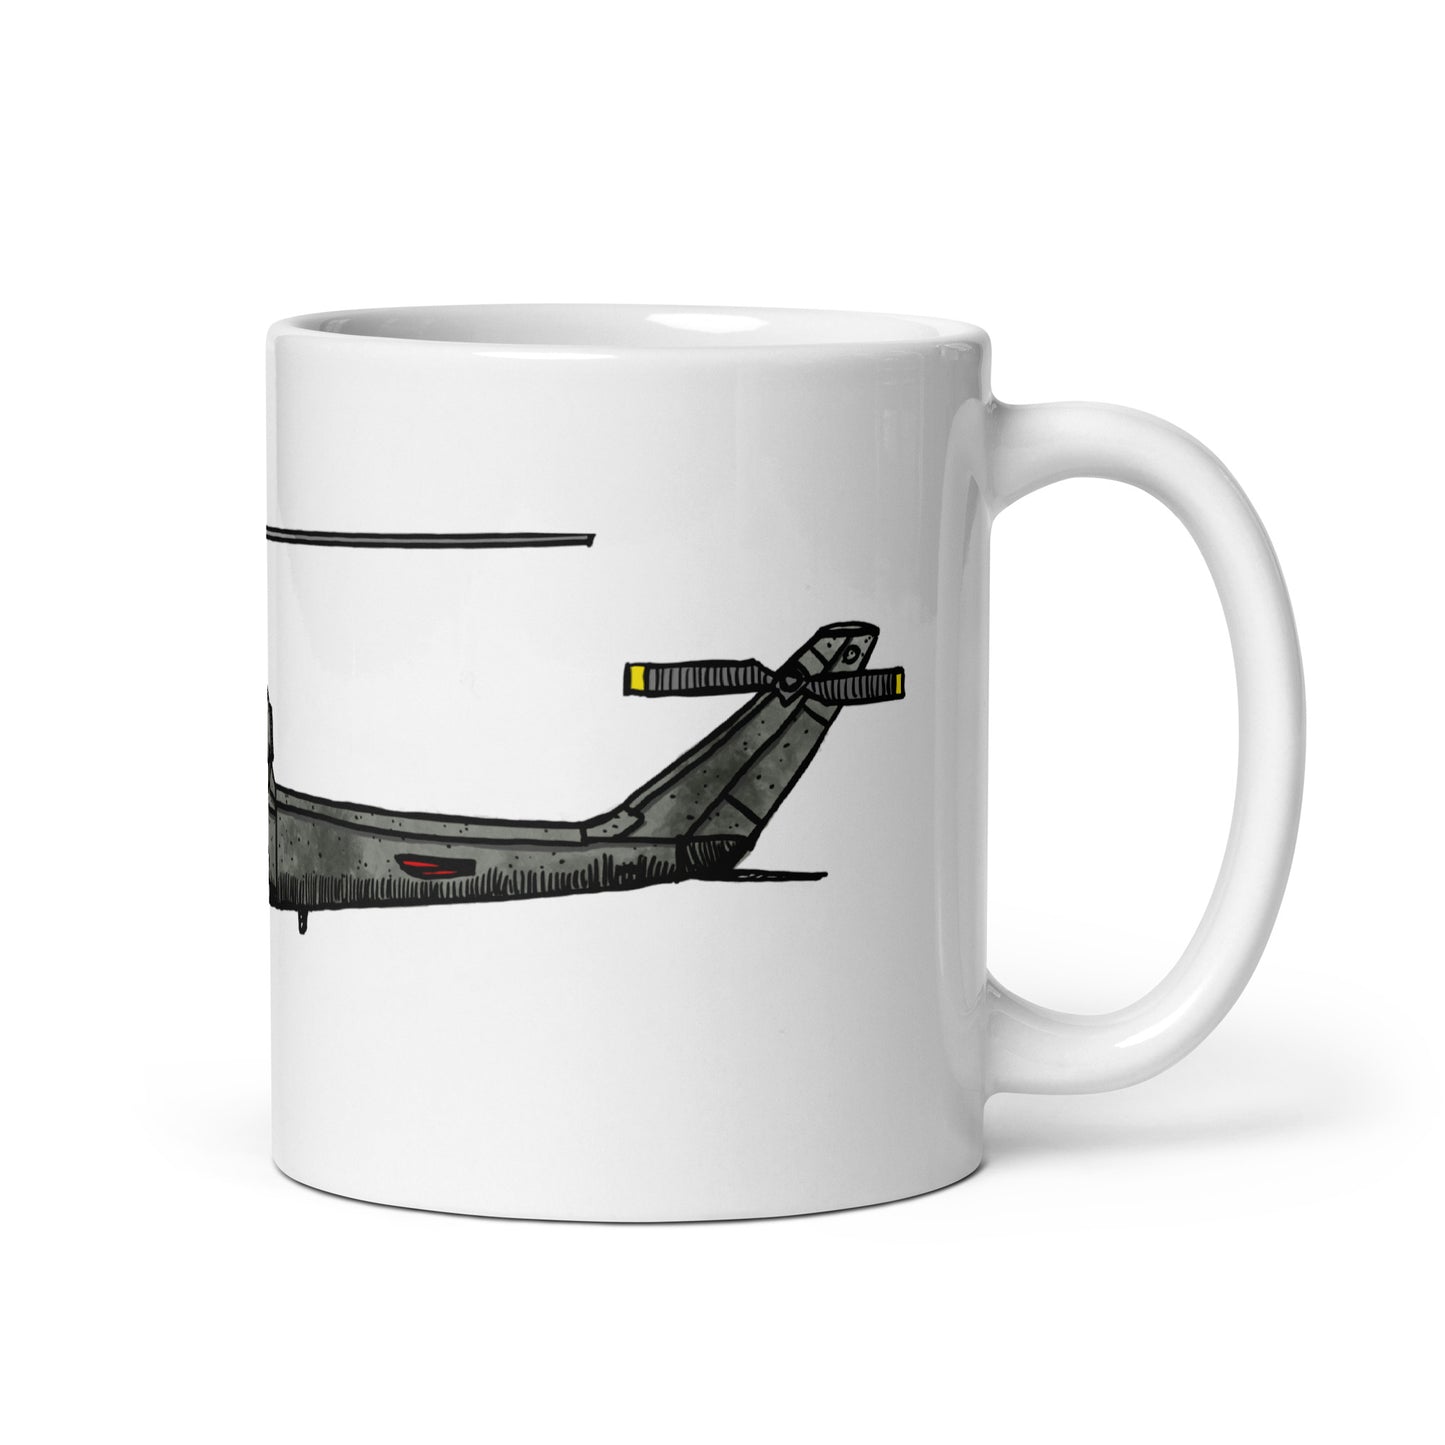 BellavanceInk: Coffee Mug With A Vintage Cobra Attack Helicopter Pen & Ink Sketch With Watercolor